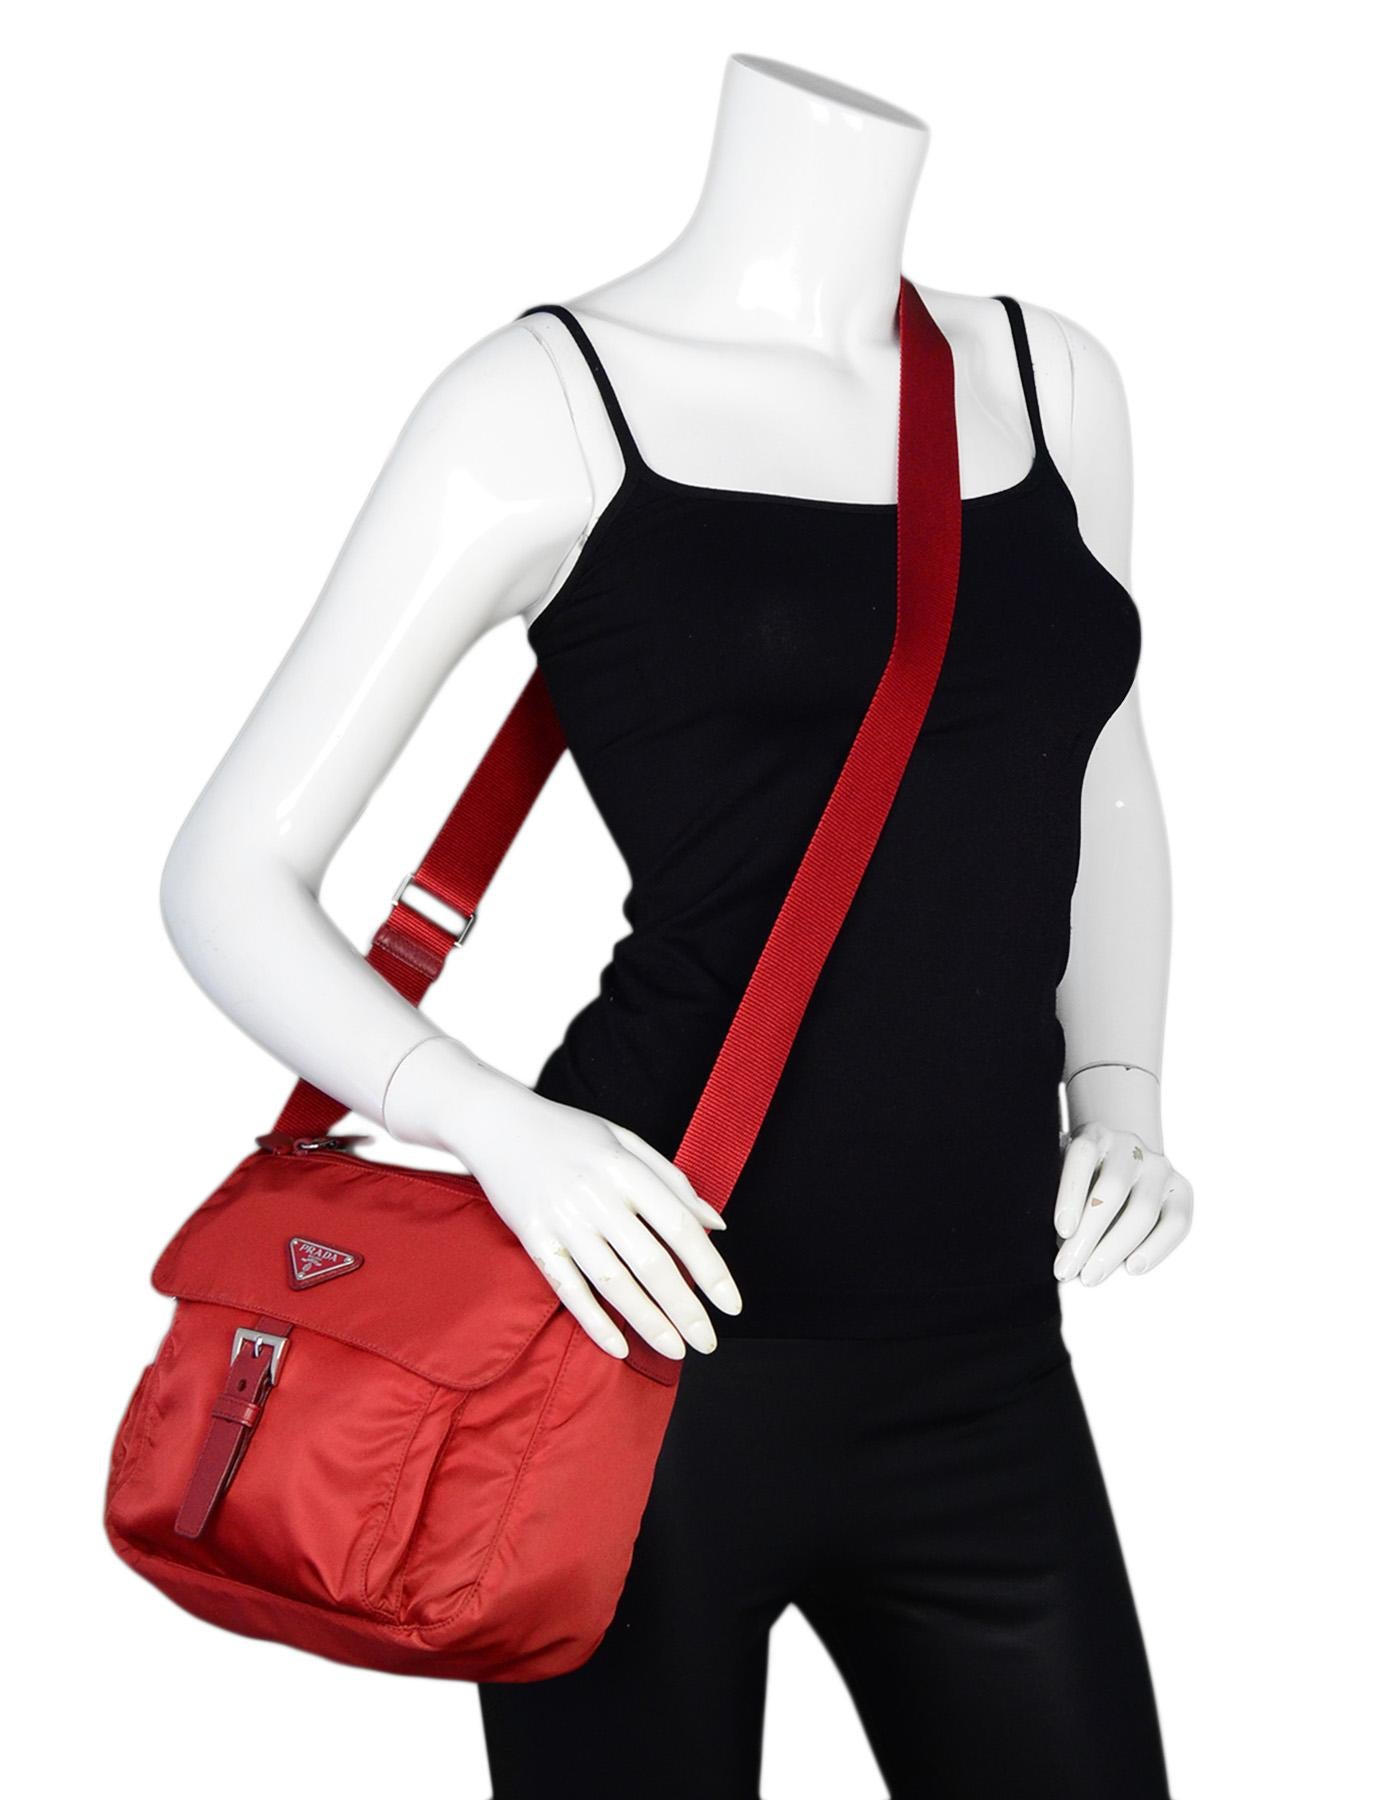 Prada Fouco Red Nylon Flap Buckle Messenger Bag BT8994

Made In: Italy
Color: Red
Hardware: Silvertone hardware
Materials: Nylon, leather trim
Lining: Red monogram textile
Closure/Opening: Flap with buckle closure
Exterior Pockets: One slit pocket